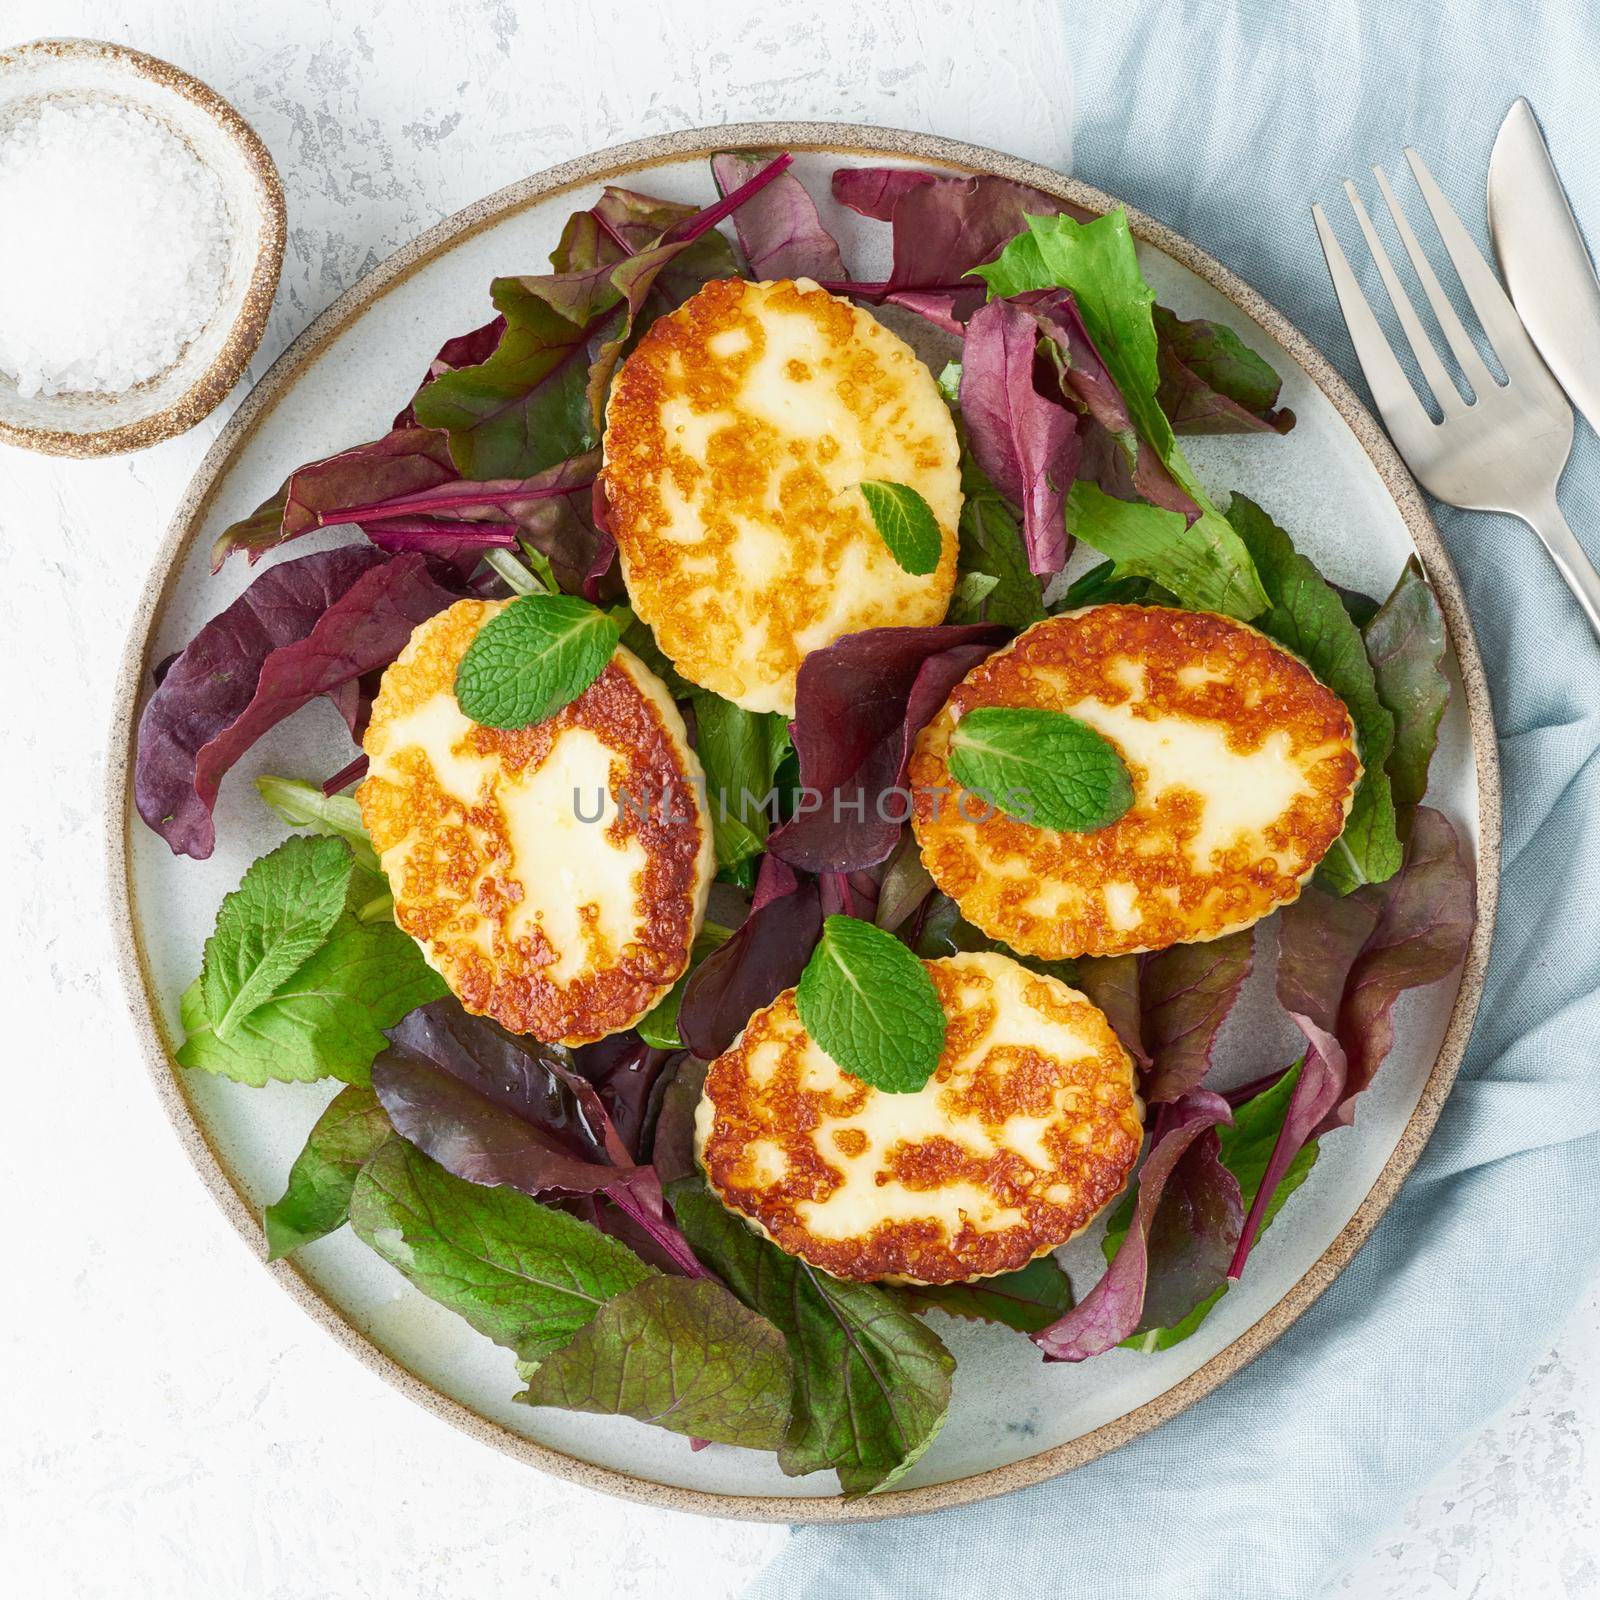 Cyprus fried halloumi with salad mix, beet tops. Lchf, pegan, fodmap, paleo, scd, keto, ketogenic diet. Balanced food, clean eating recipe. Top view, a white background